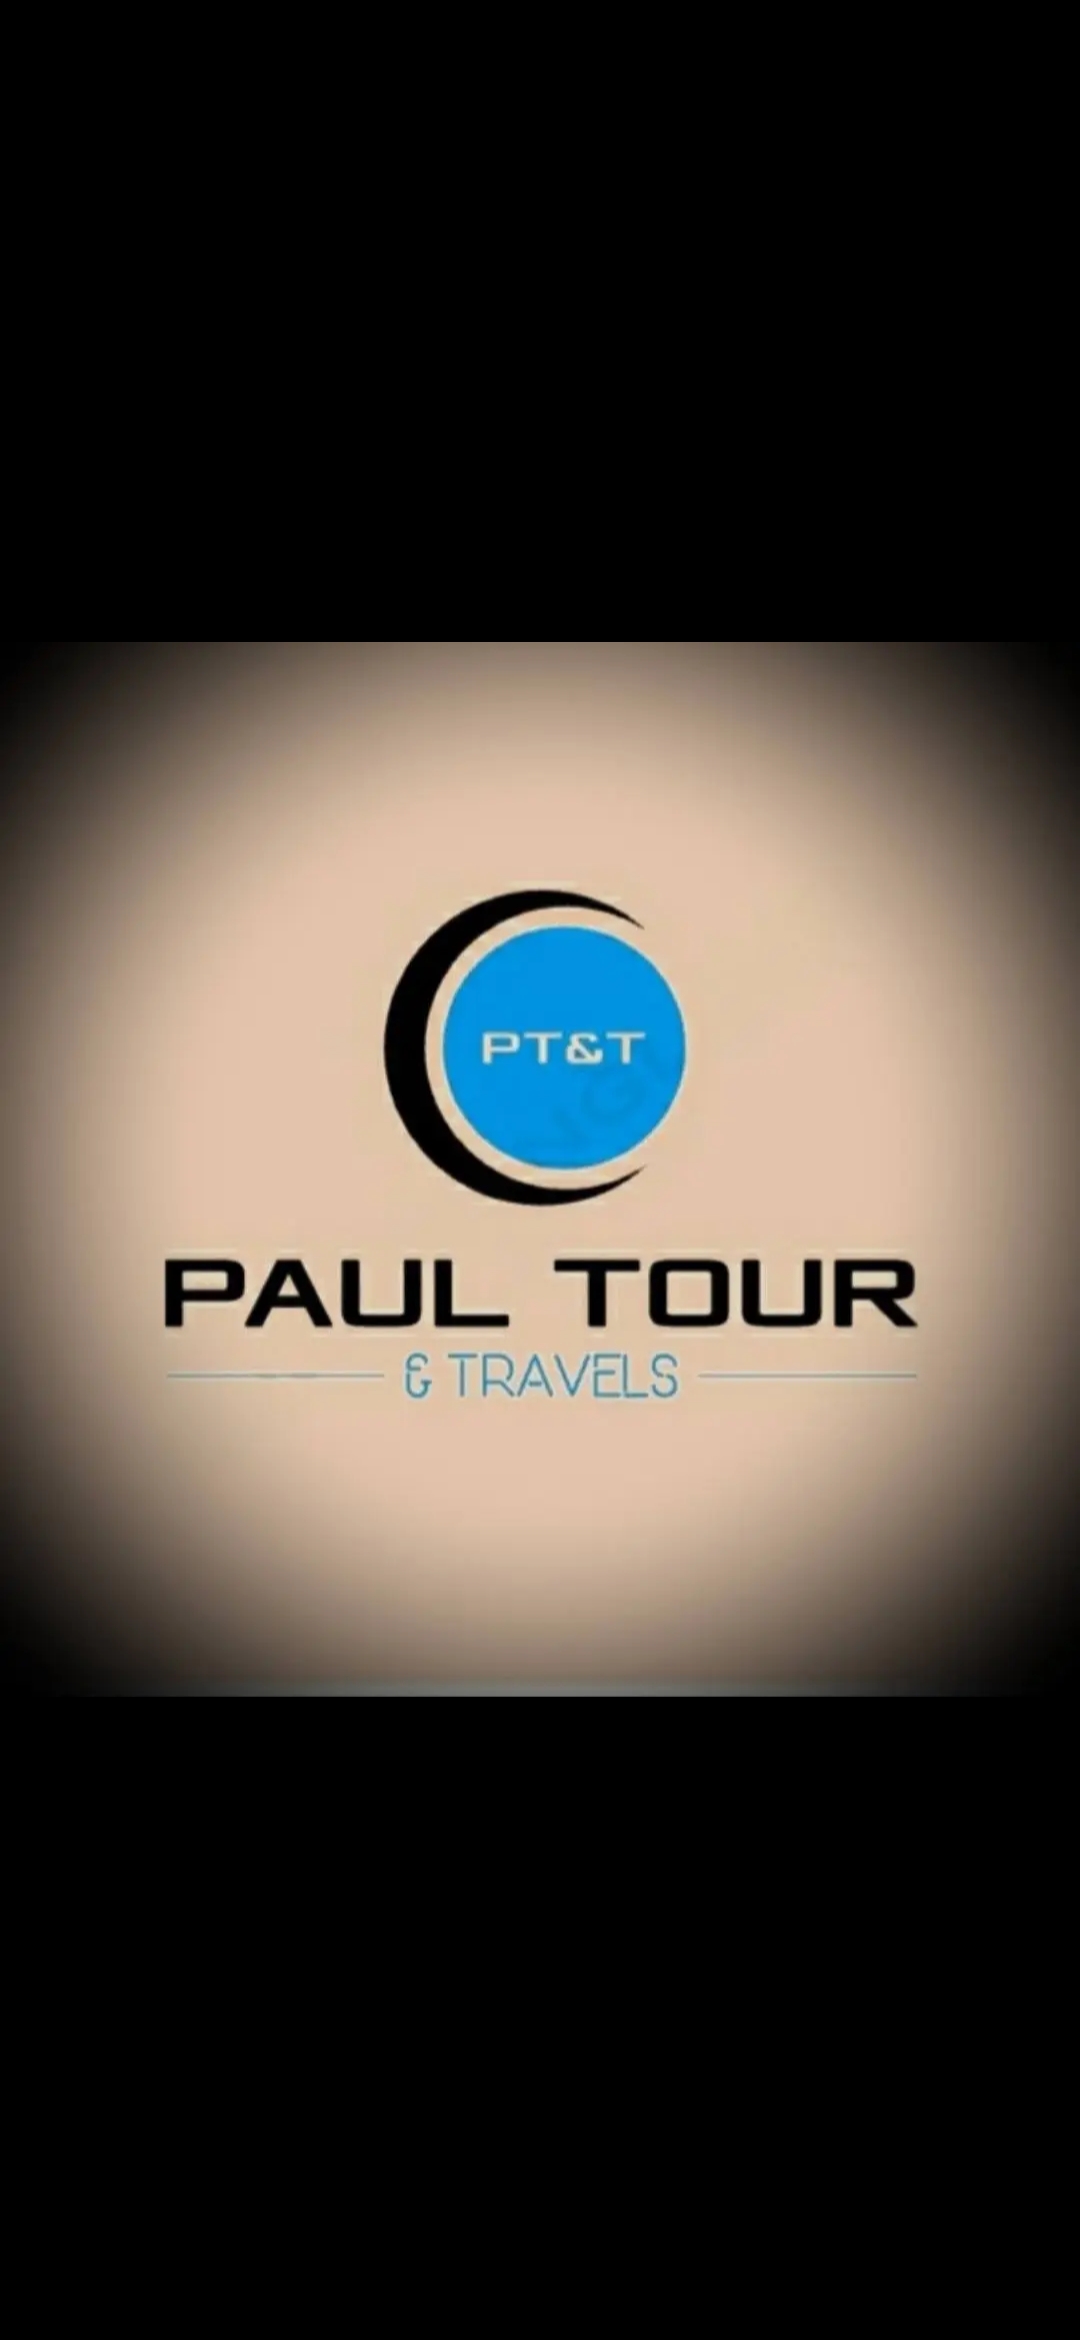 Paul Tour and Travels